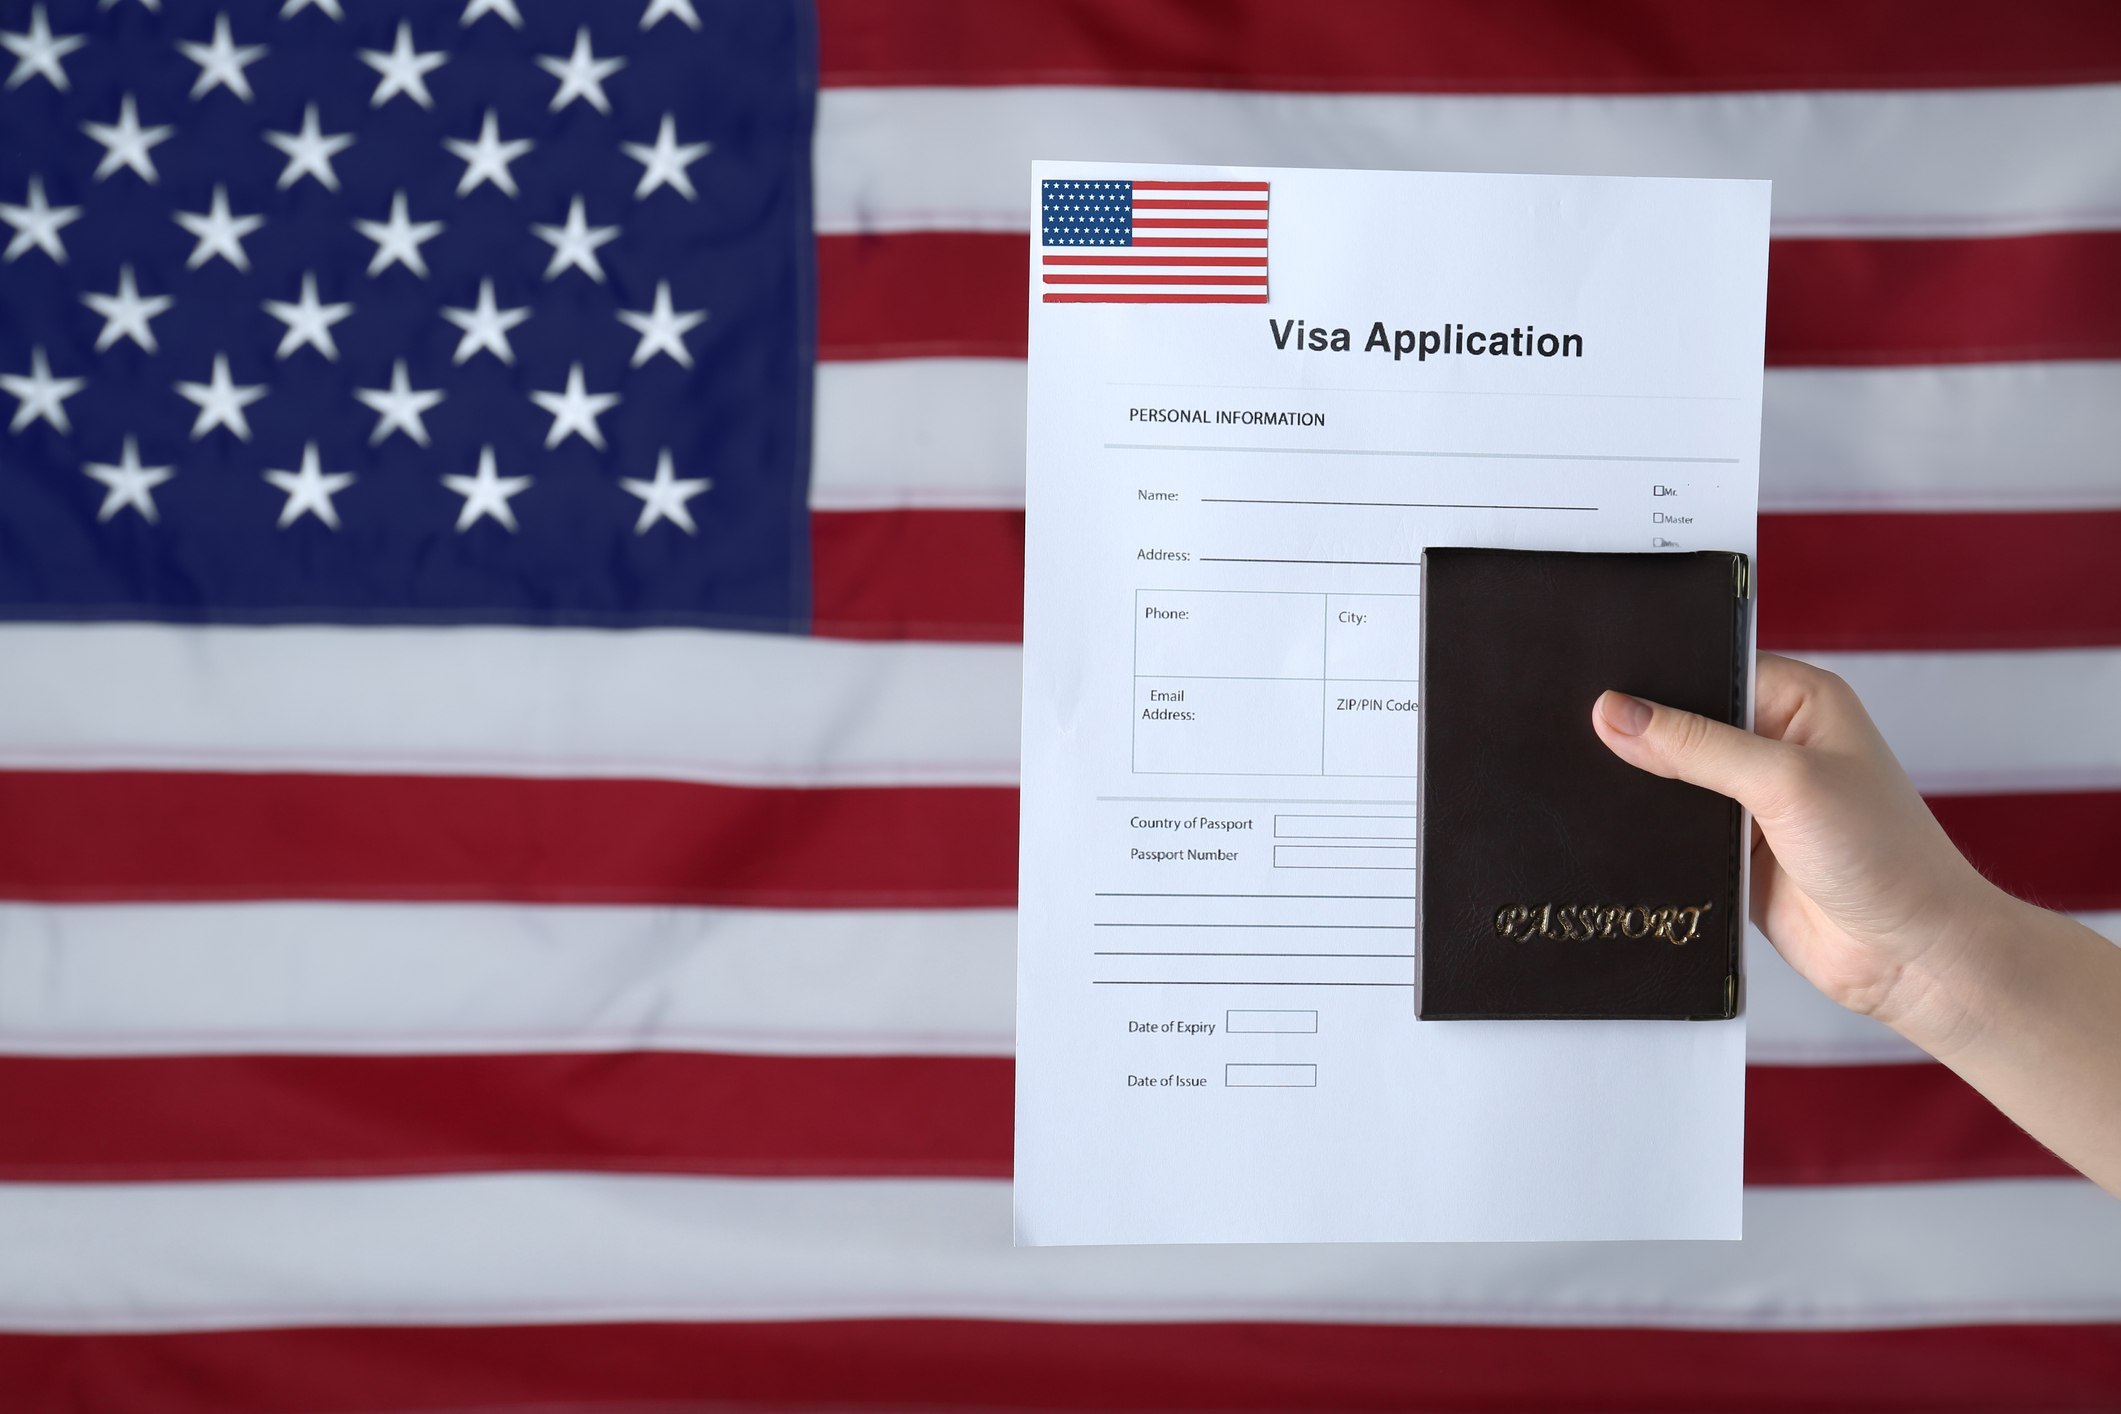 EB-2 NIW Green Card - How to qualify for National Interest Waiver?